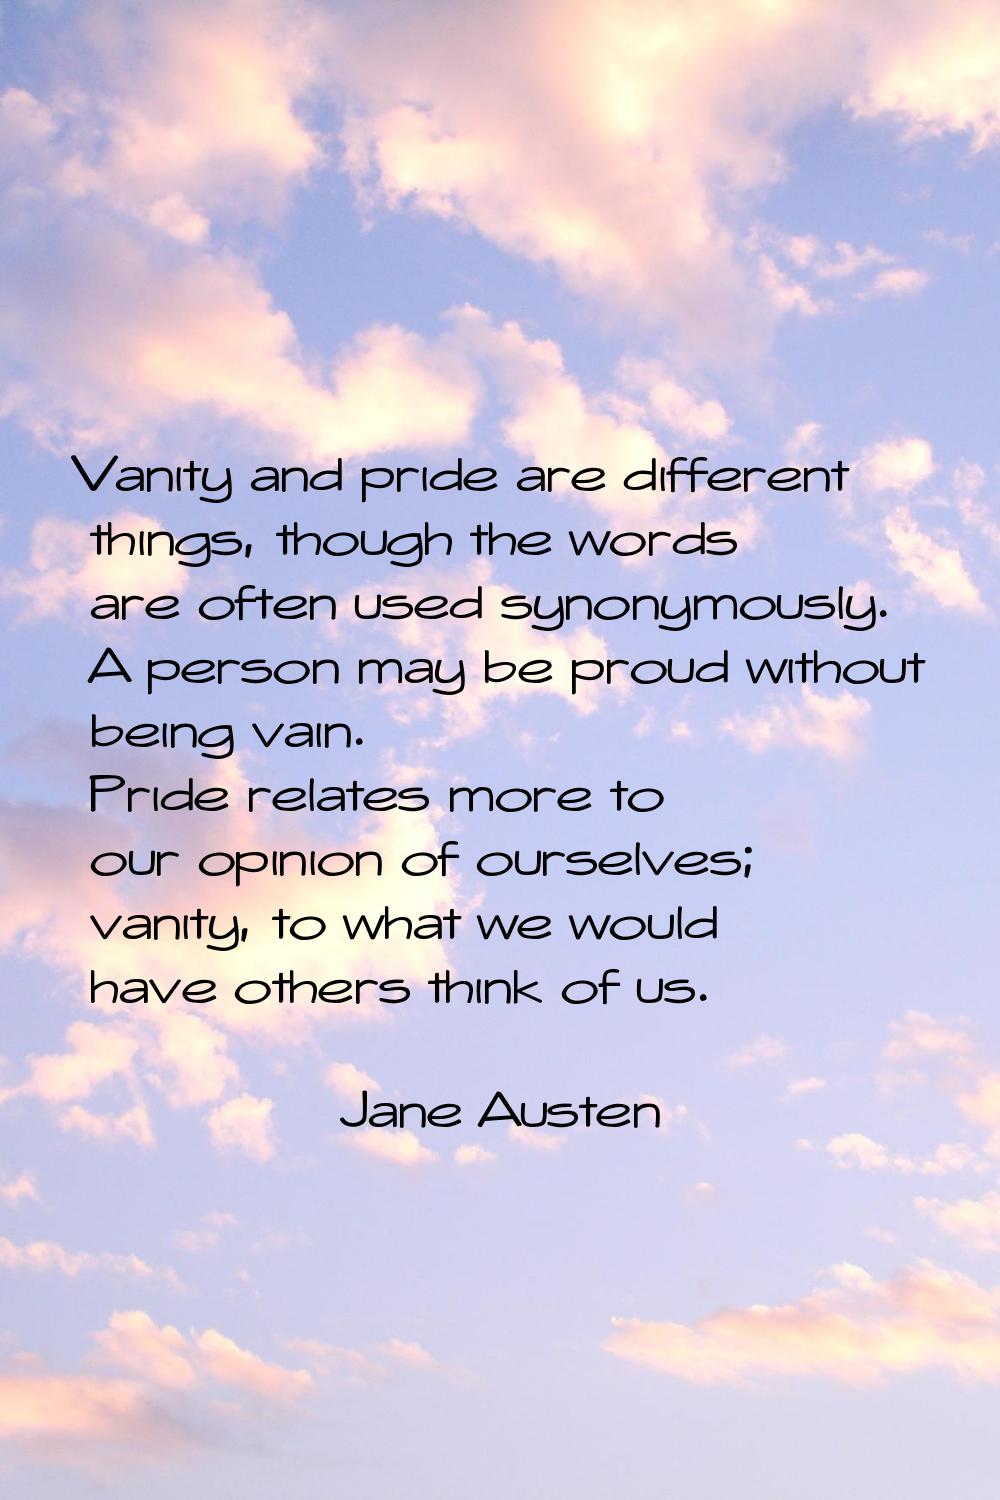 Vanity and pride are different things, though the words are often used synonymously. A person may b